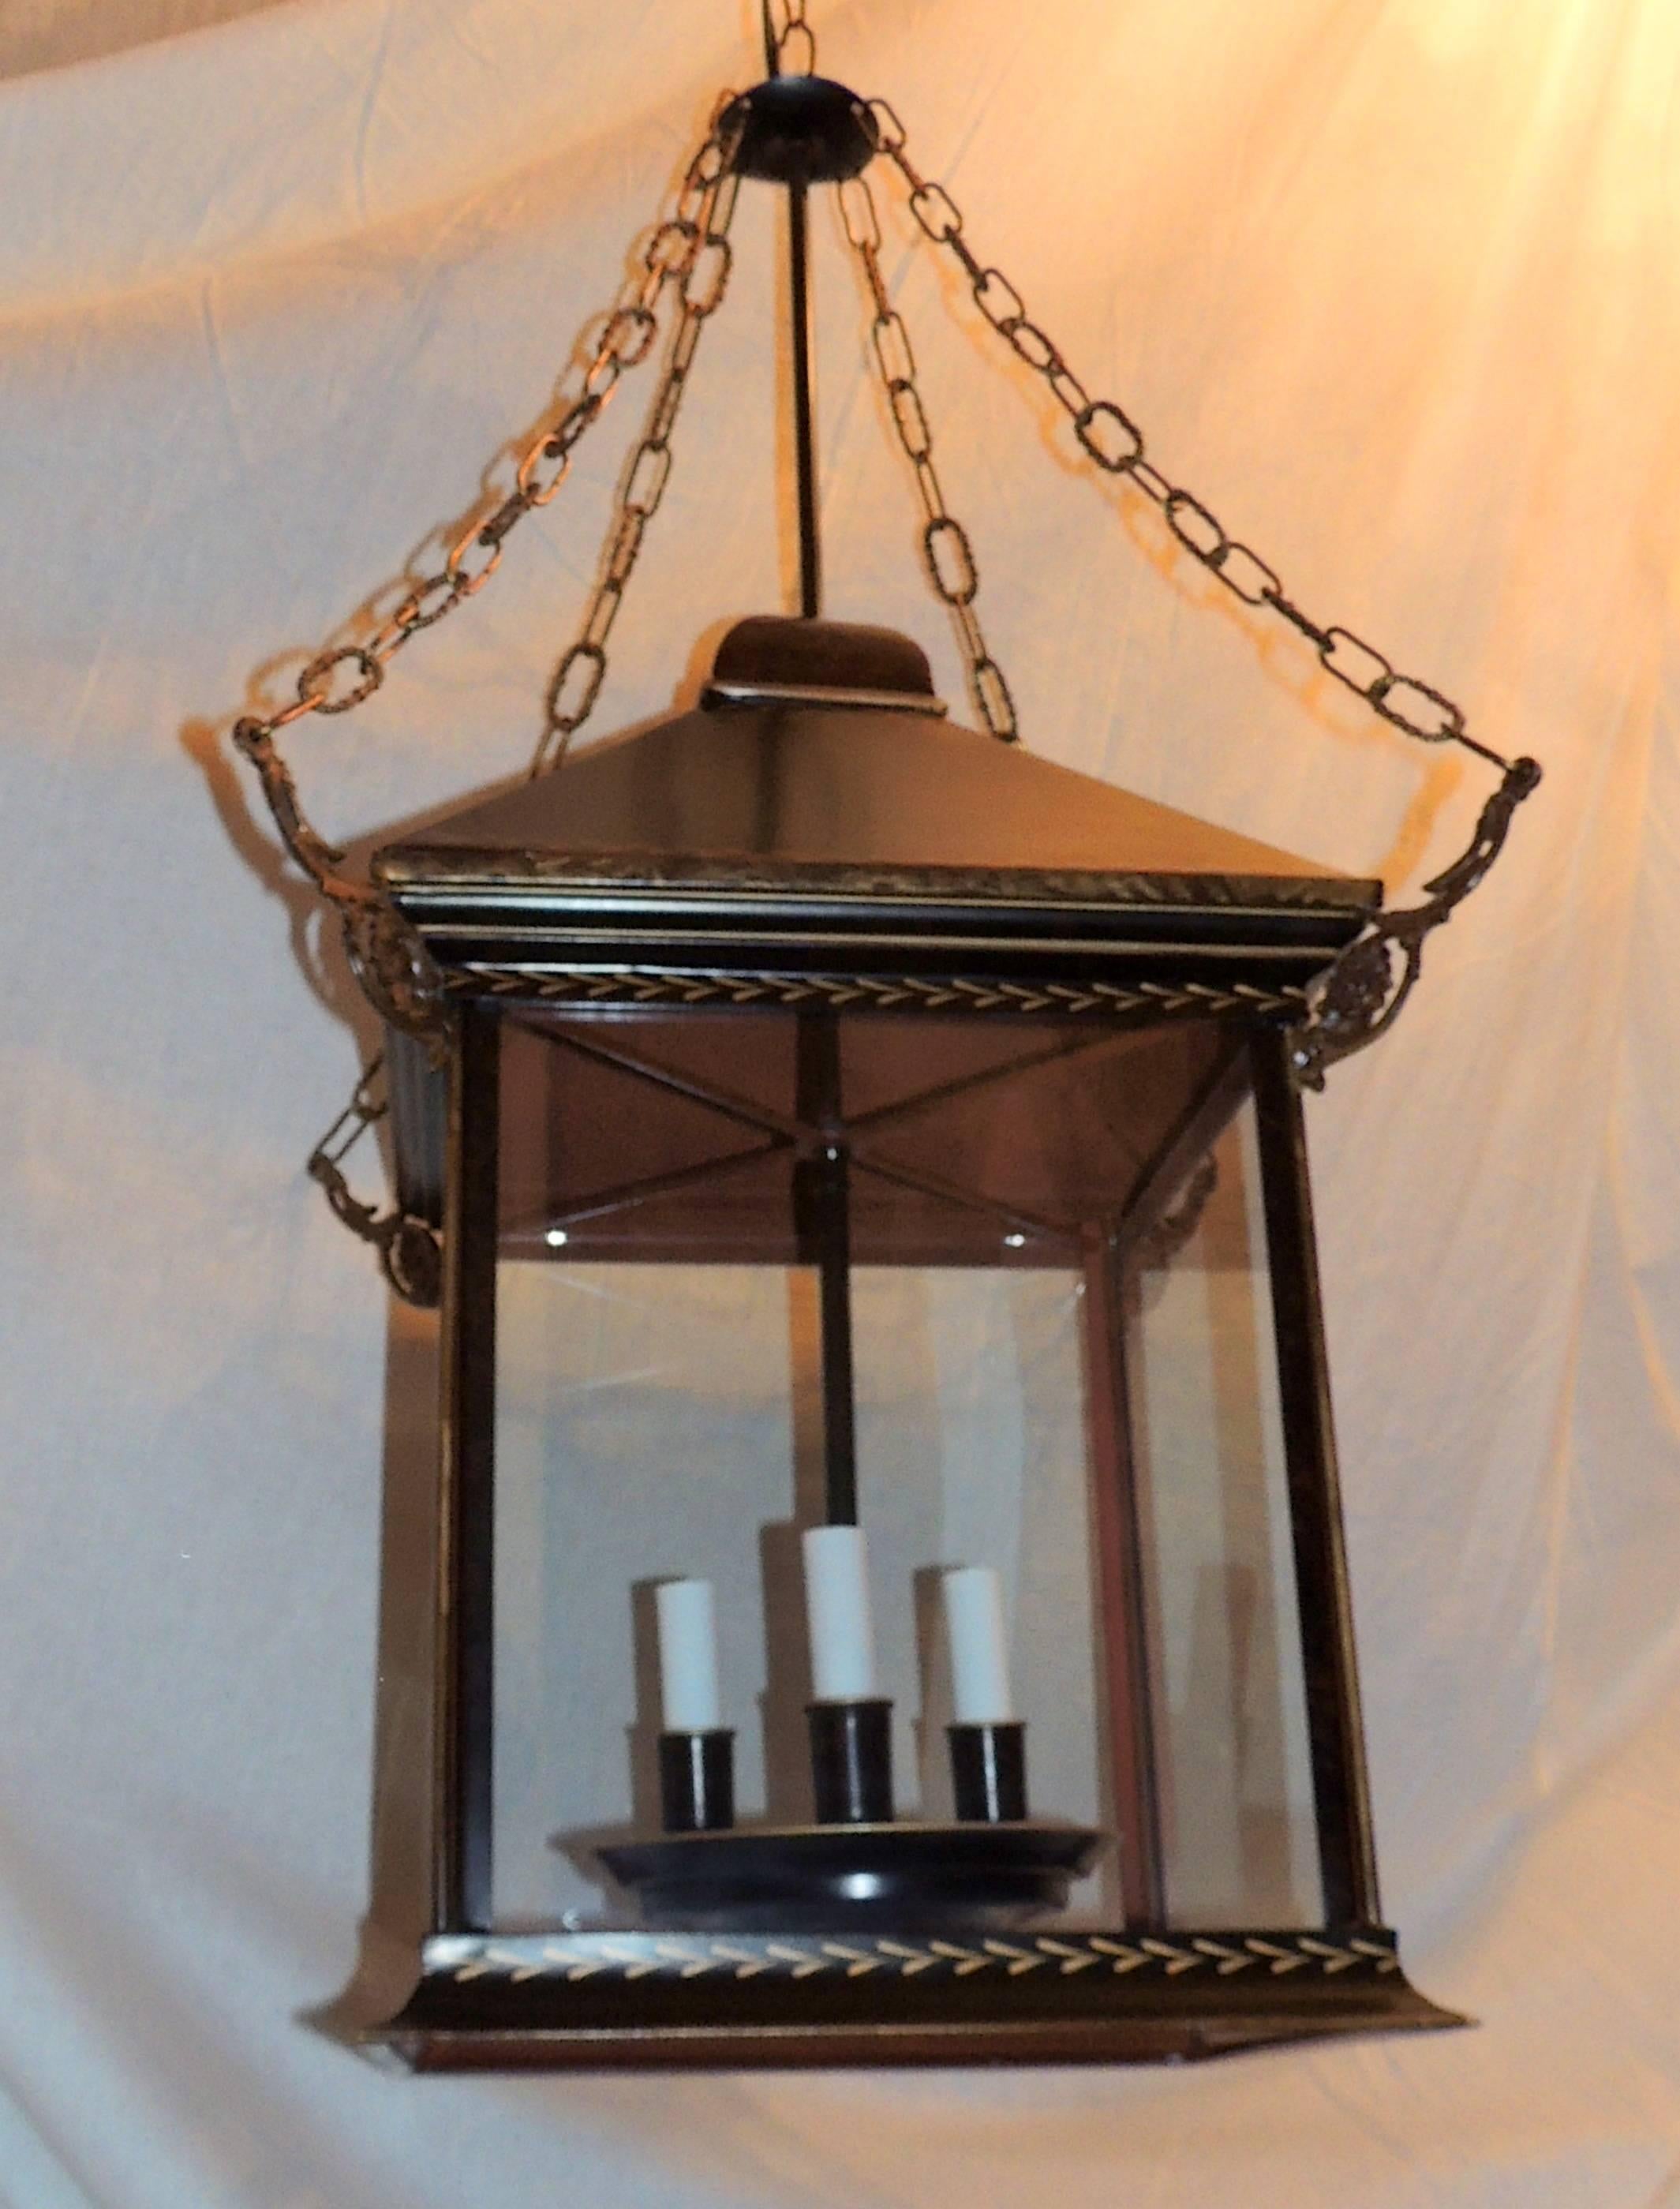 A wonderful vintage tole brown distressed leather and gold gilt three-light large glass square lantern pendent fixture.

Measures: 18" square x 36" high.